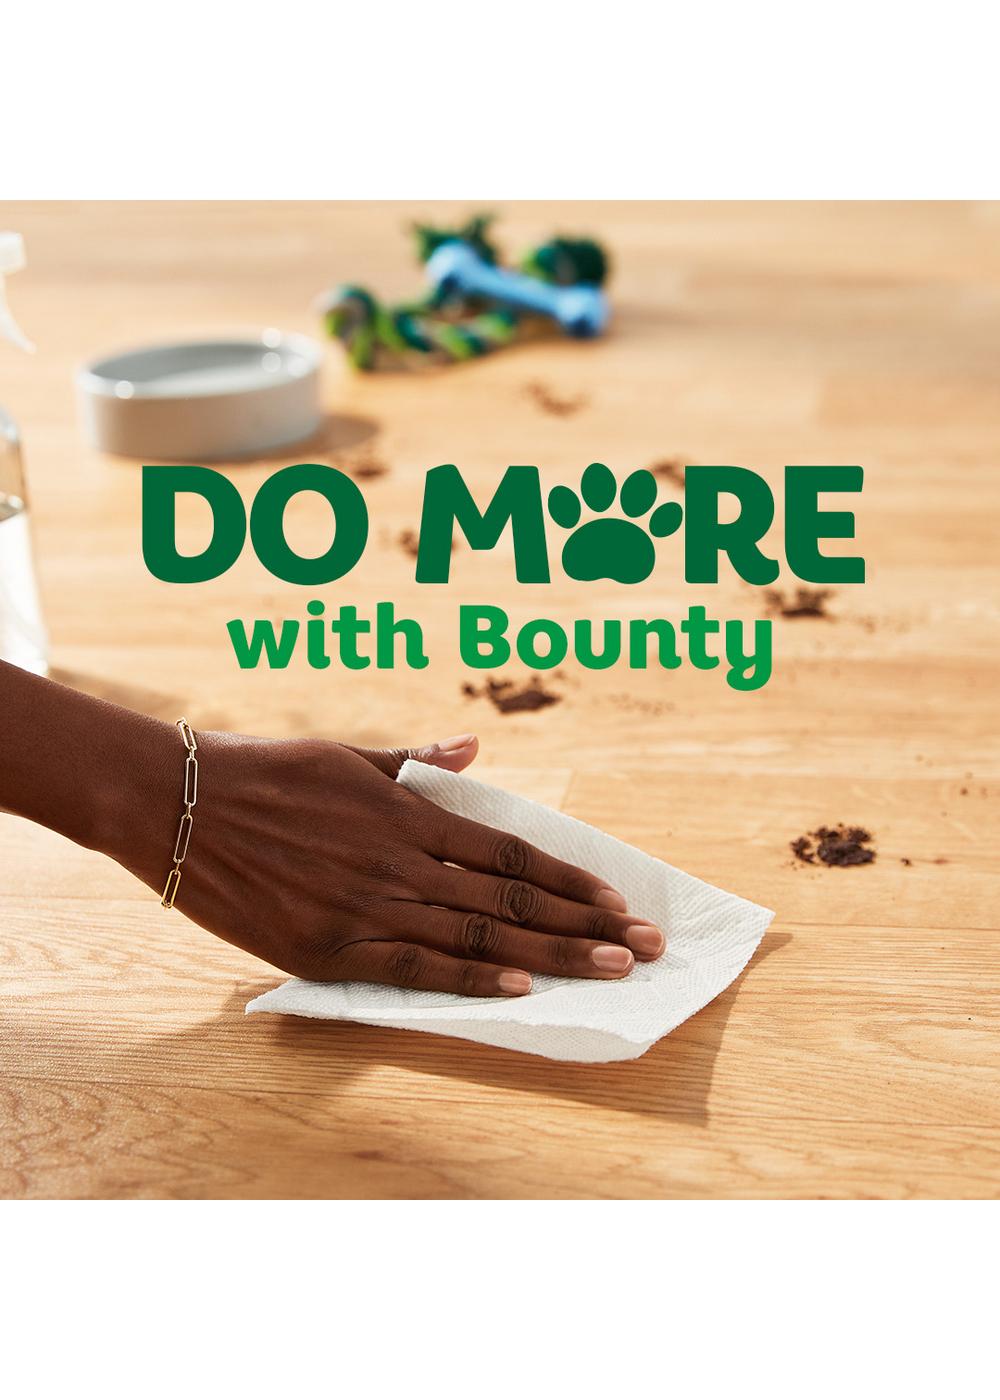 Bounty Select-A-Size Double Rolls Paper Towels; image 8 of 17